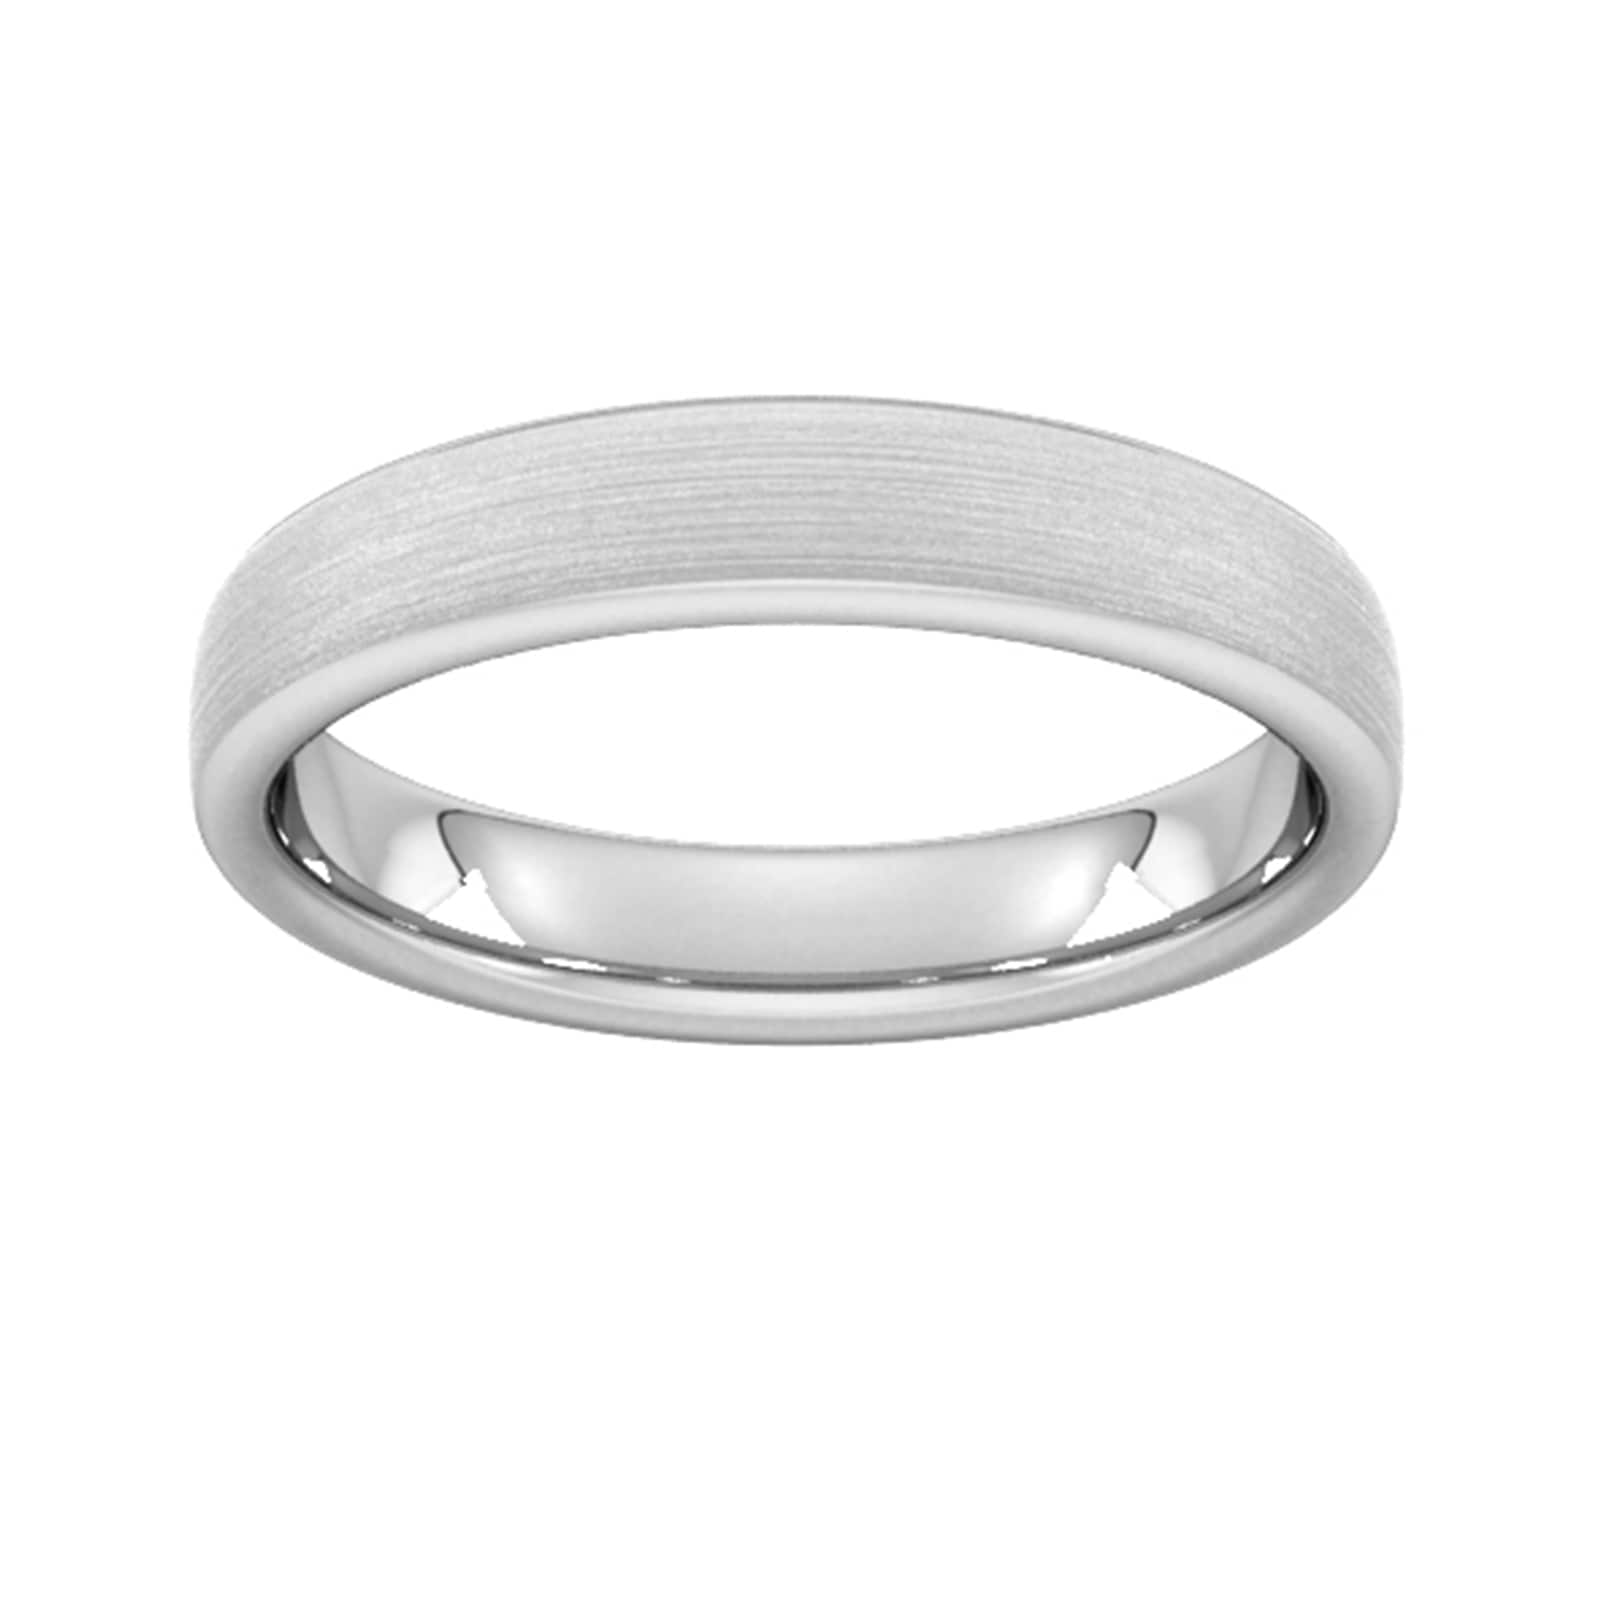 4mm Flat Court Heavy Matt Finished Wedding Ring In 9 Carat White Gold - Ring Size M